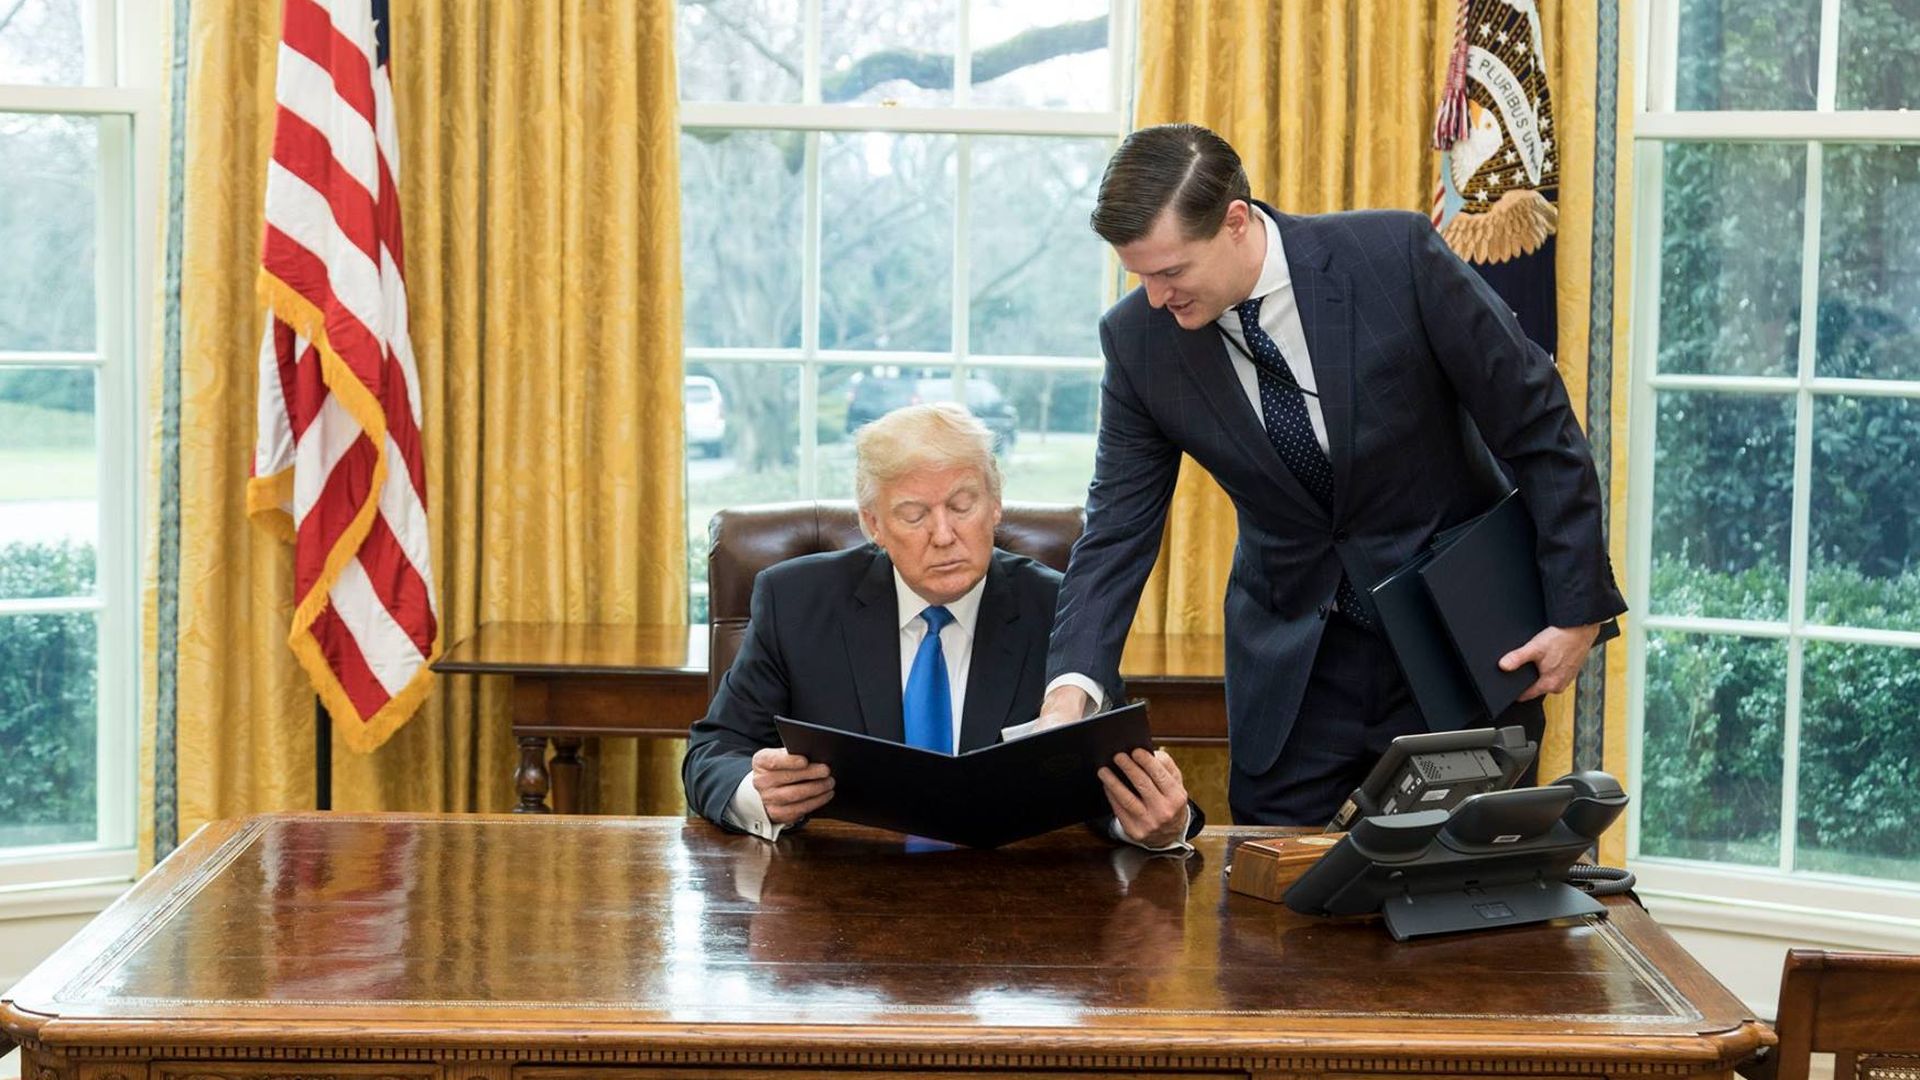 Rob Porter with President Trump in the Oval Office